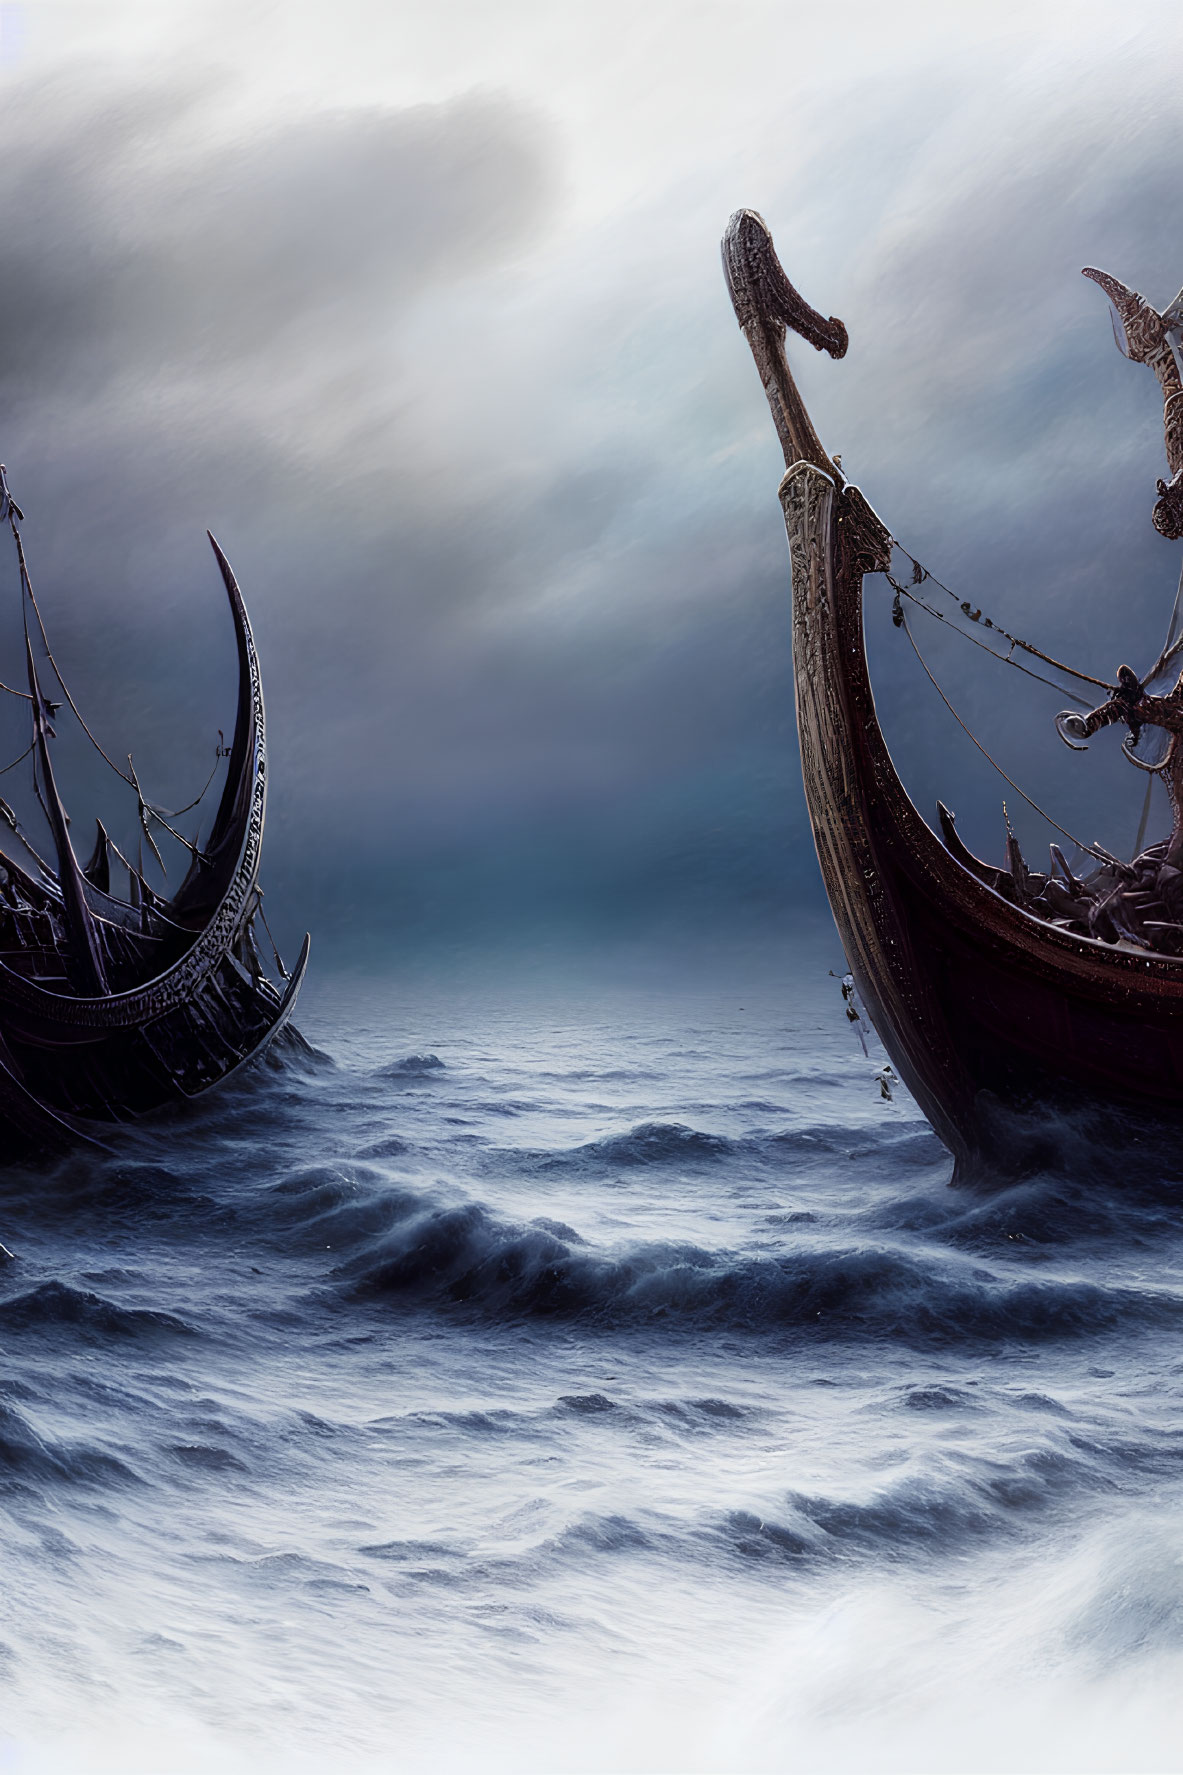 Viking ships sailing in stormy seas with dragon figureheads